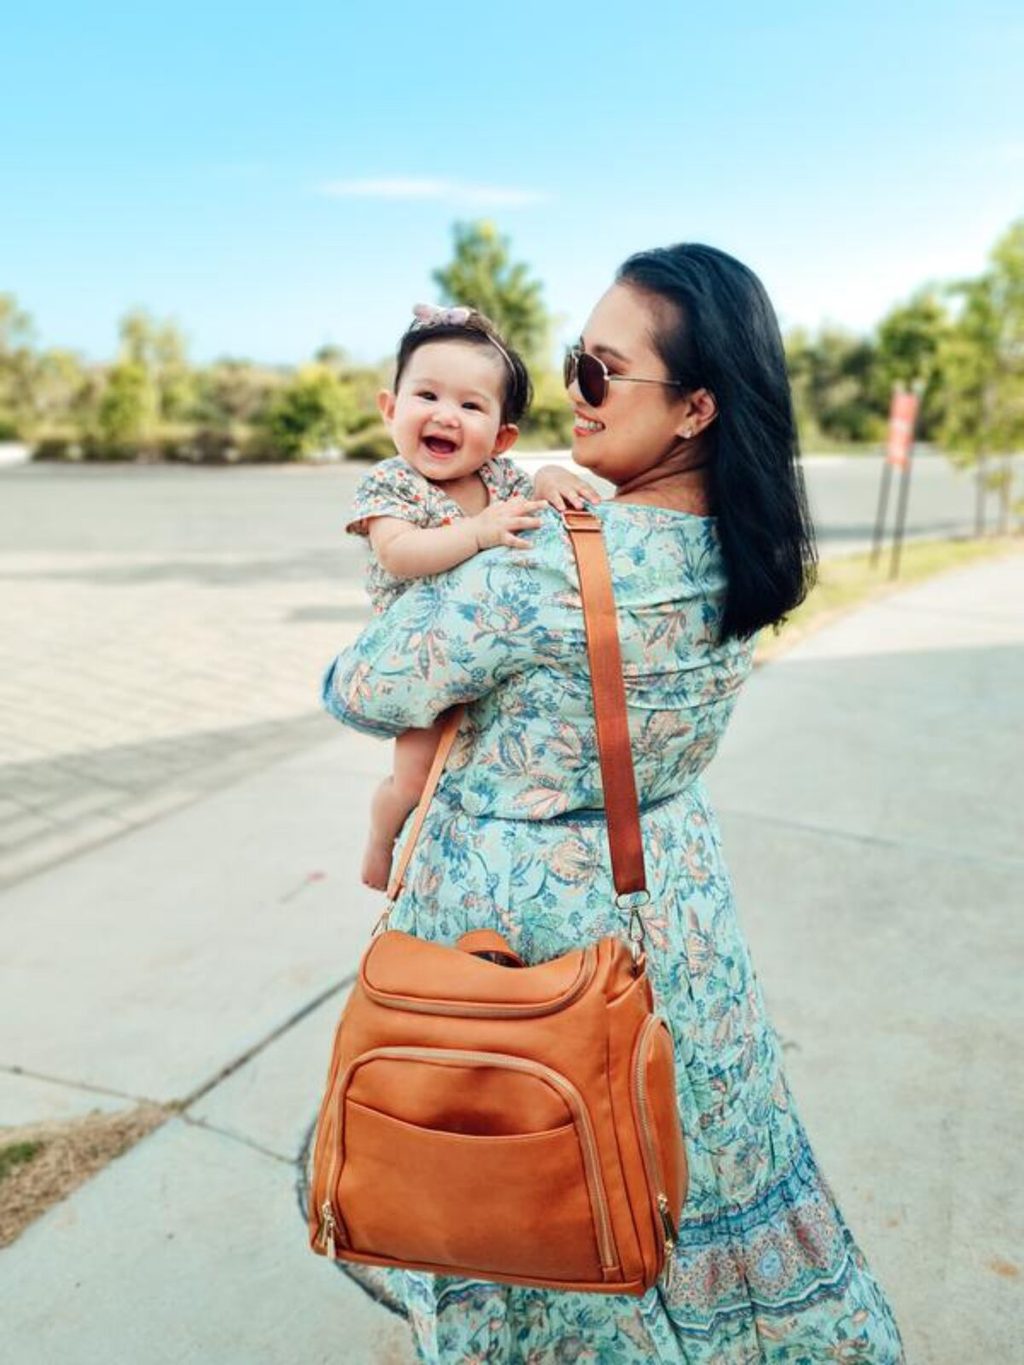 A Diaper Bag Checklist – From A 2 Under 2 Mom